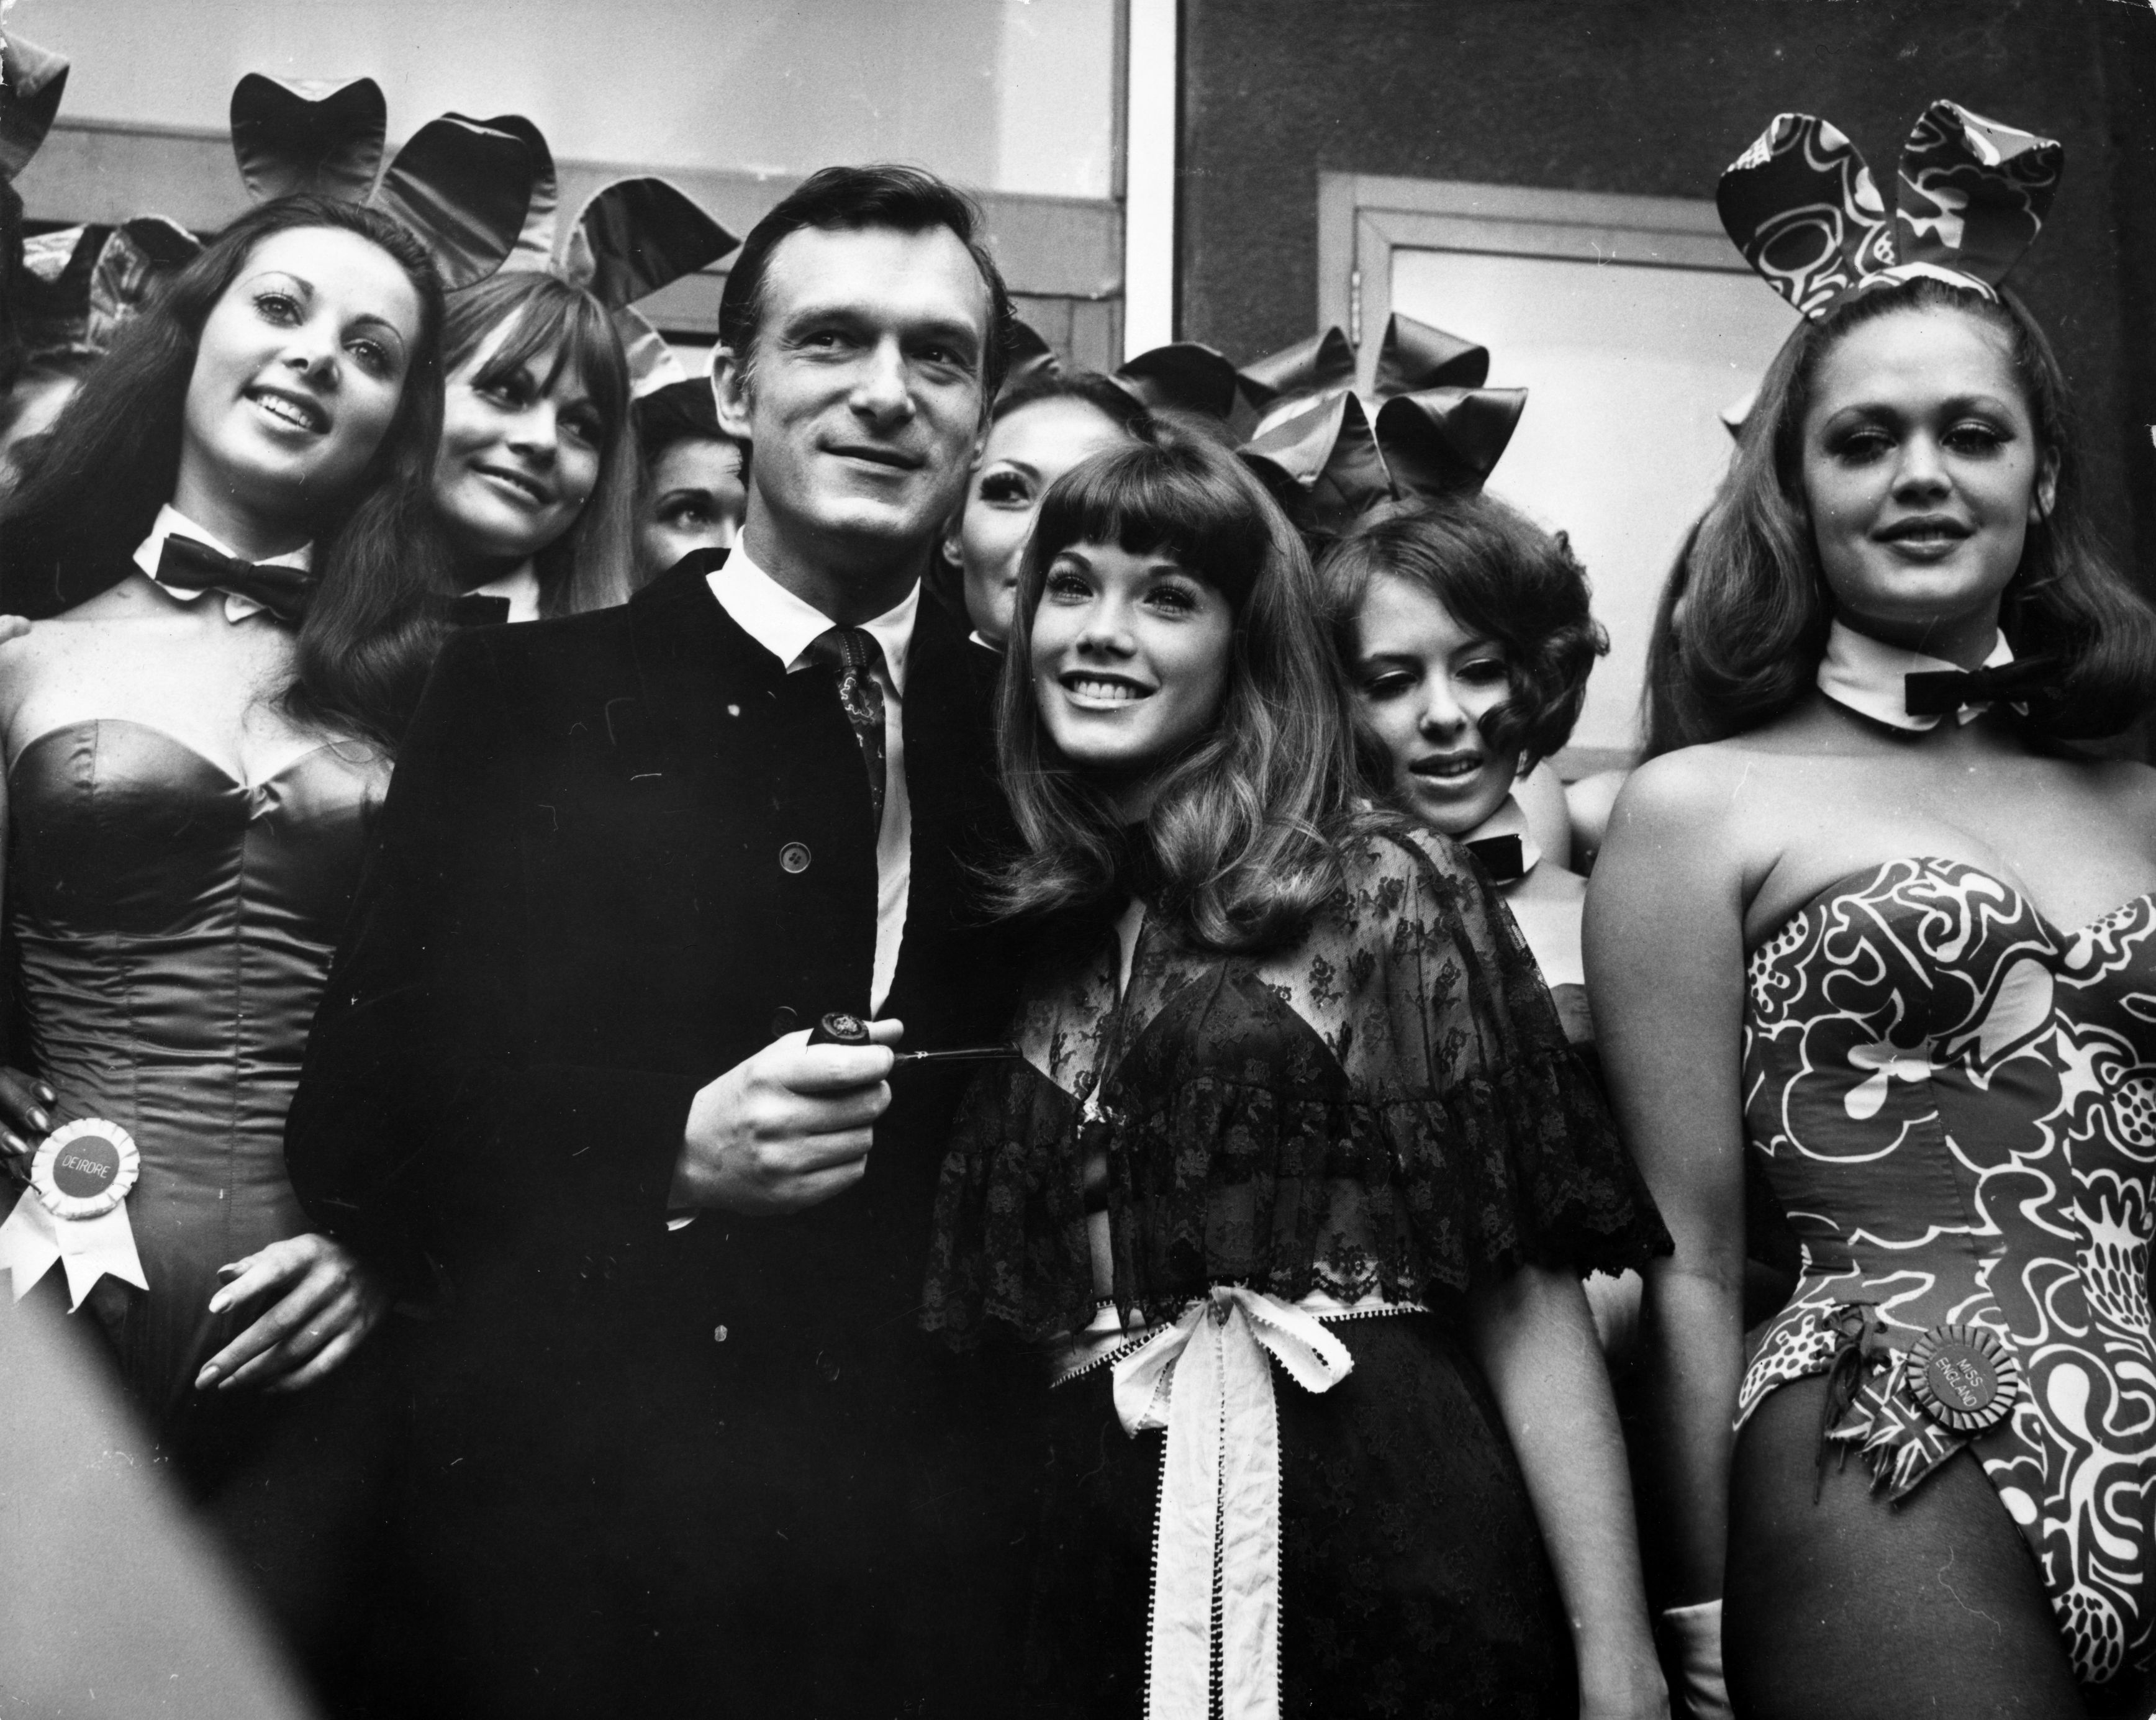 Sedatives, orgies and bestiality The documentary that shines a light on historical abuse at Hugh Hefners Playboy mansion